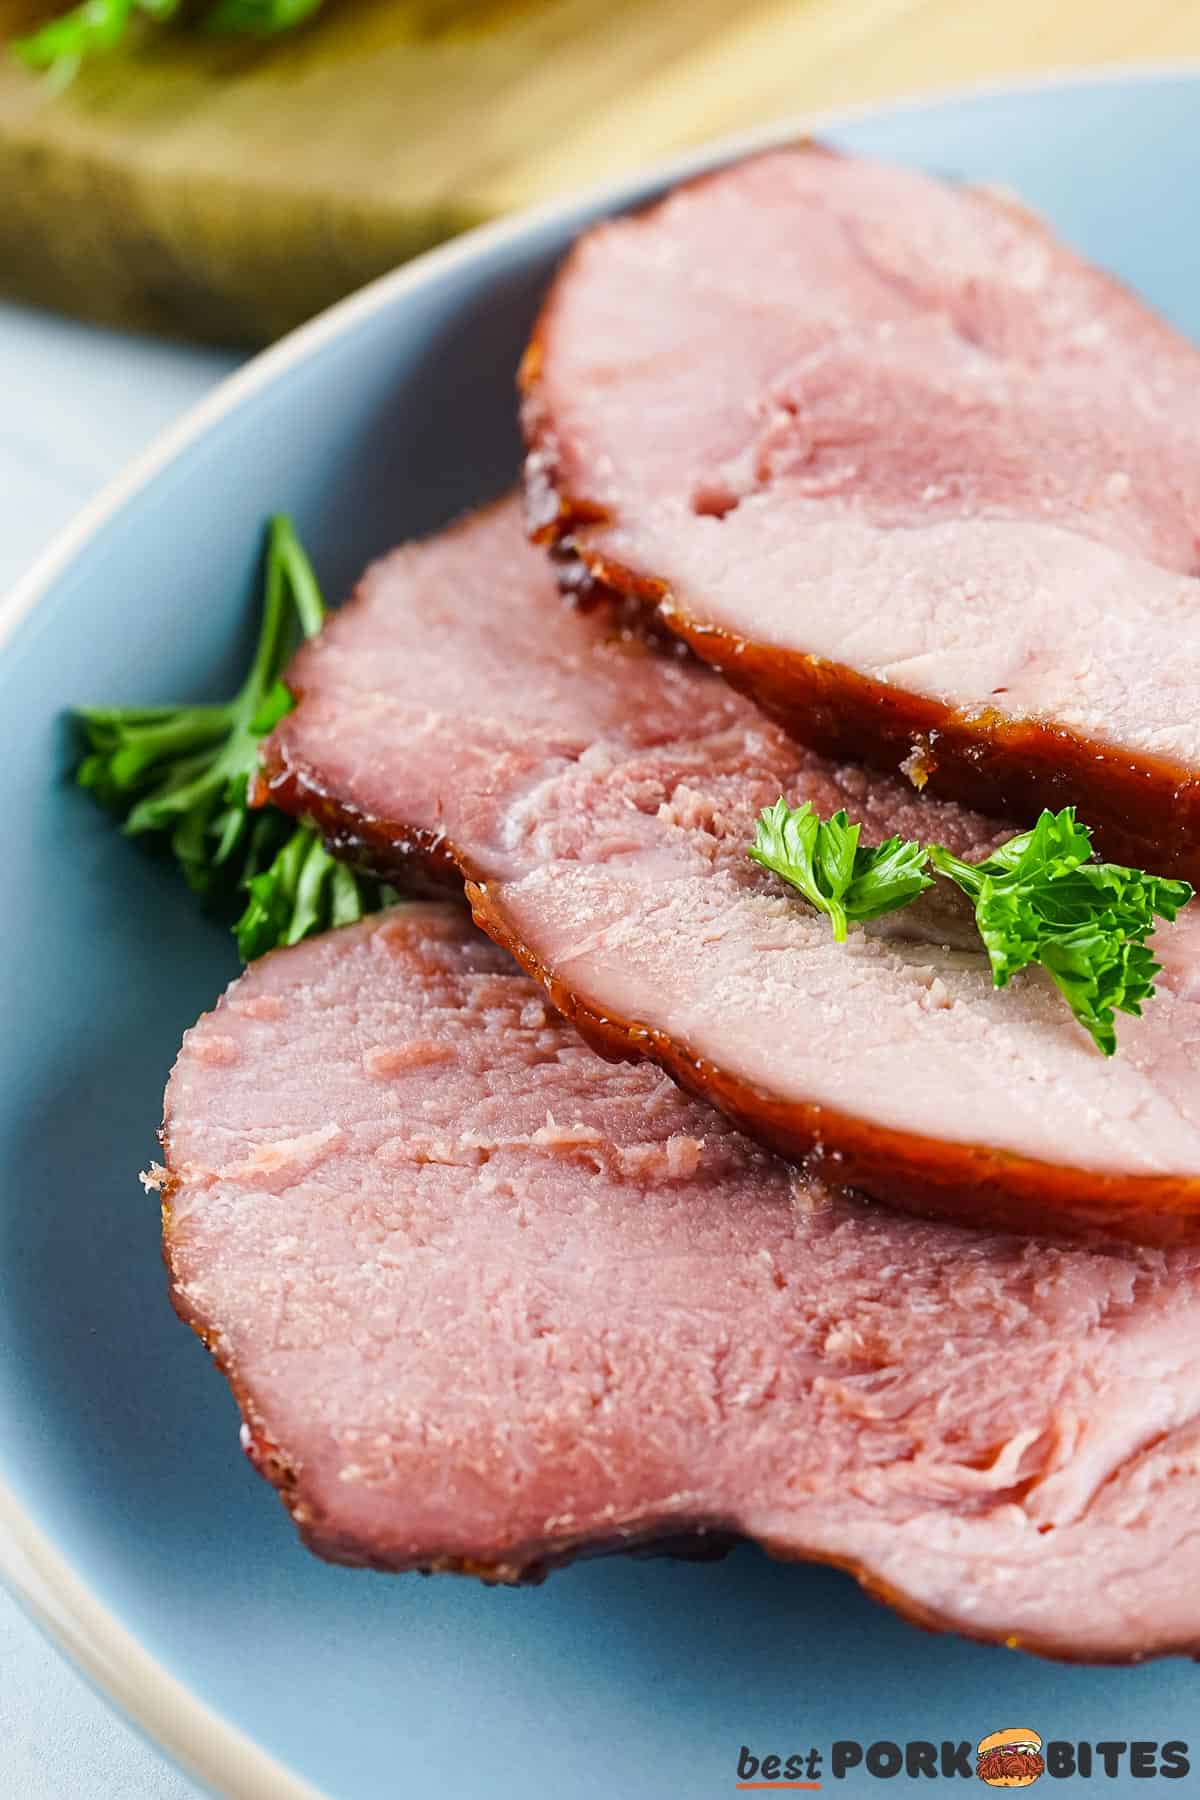 three slices of smoked ham on a blue plate with parsley garnish